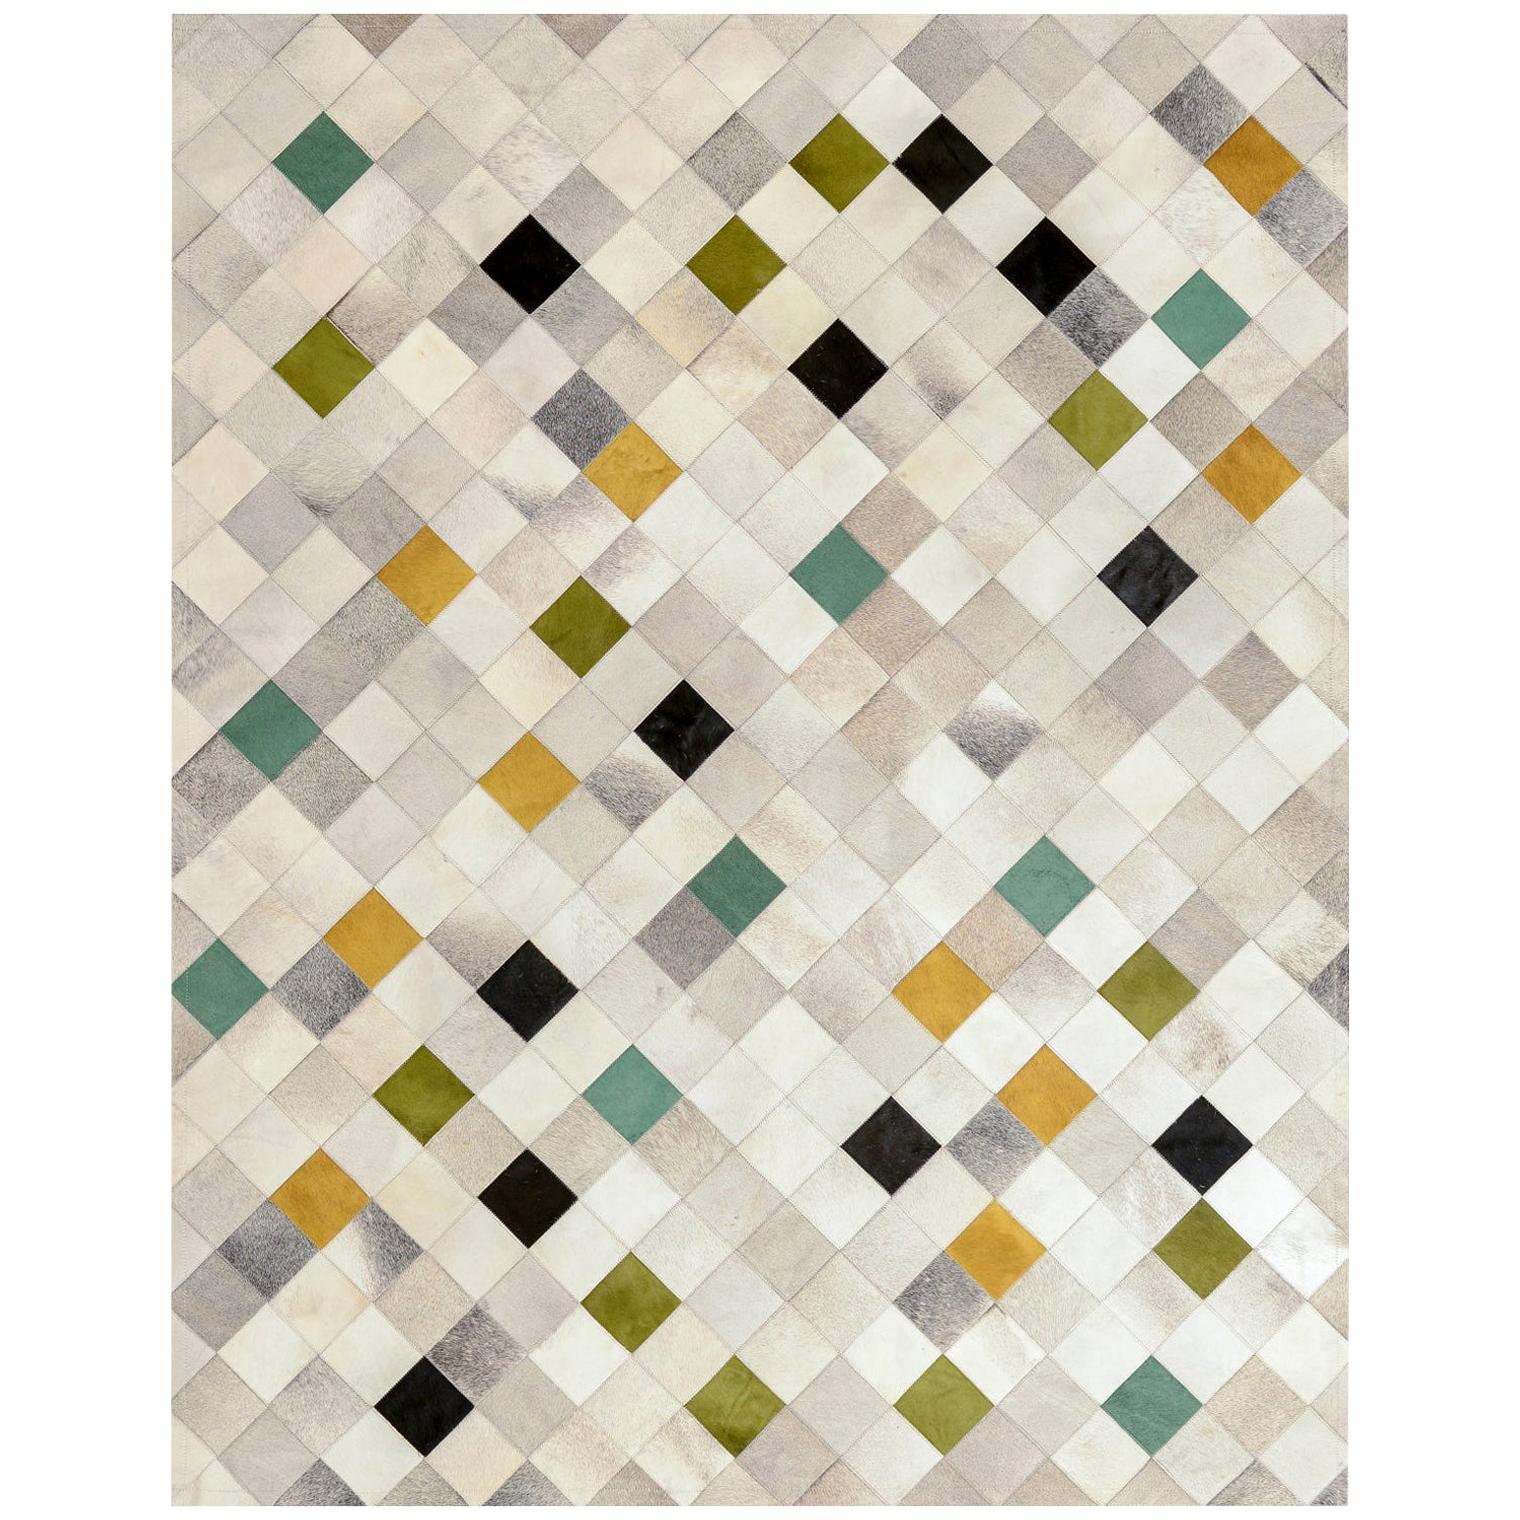 Green, Grey, Mustard Falling Squares Customizable Cowhide Area Floor Rug XXLarge For Sale